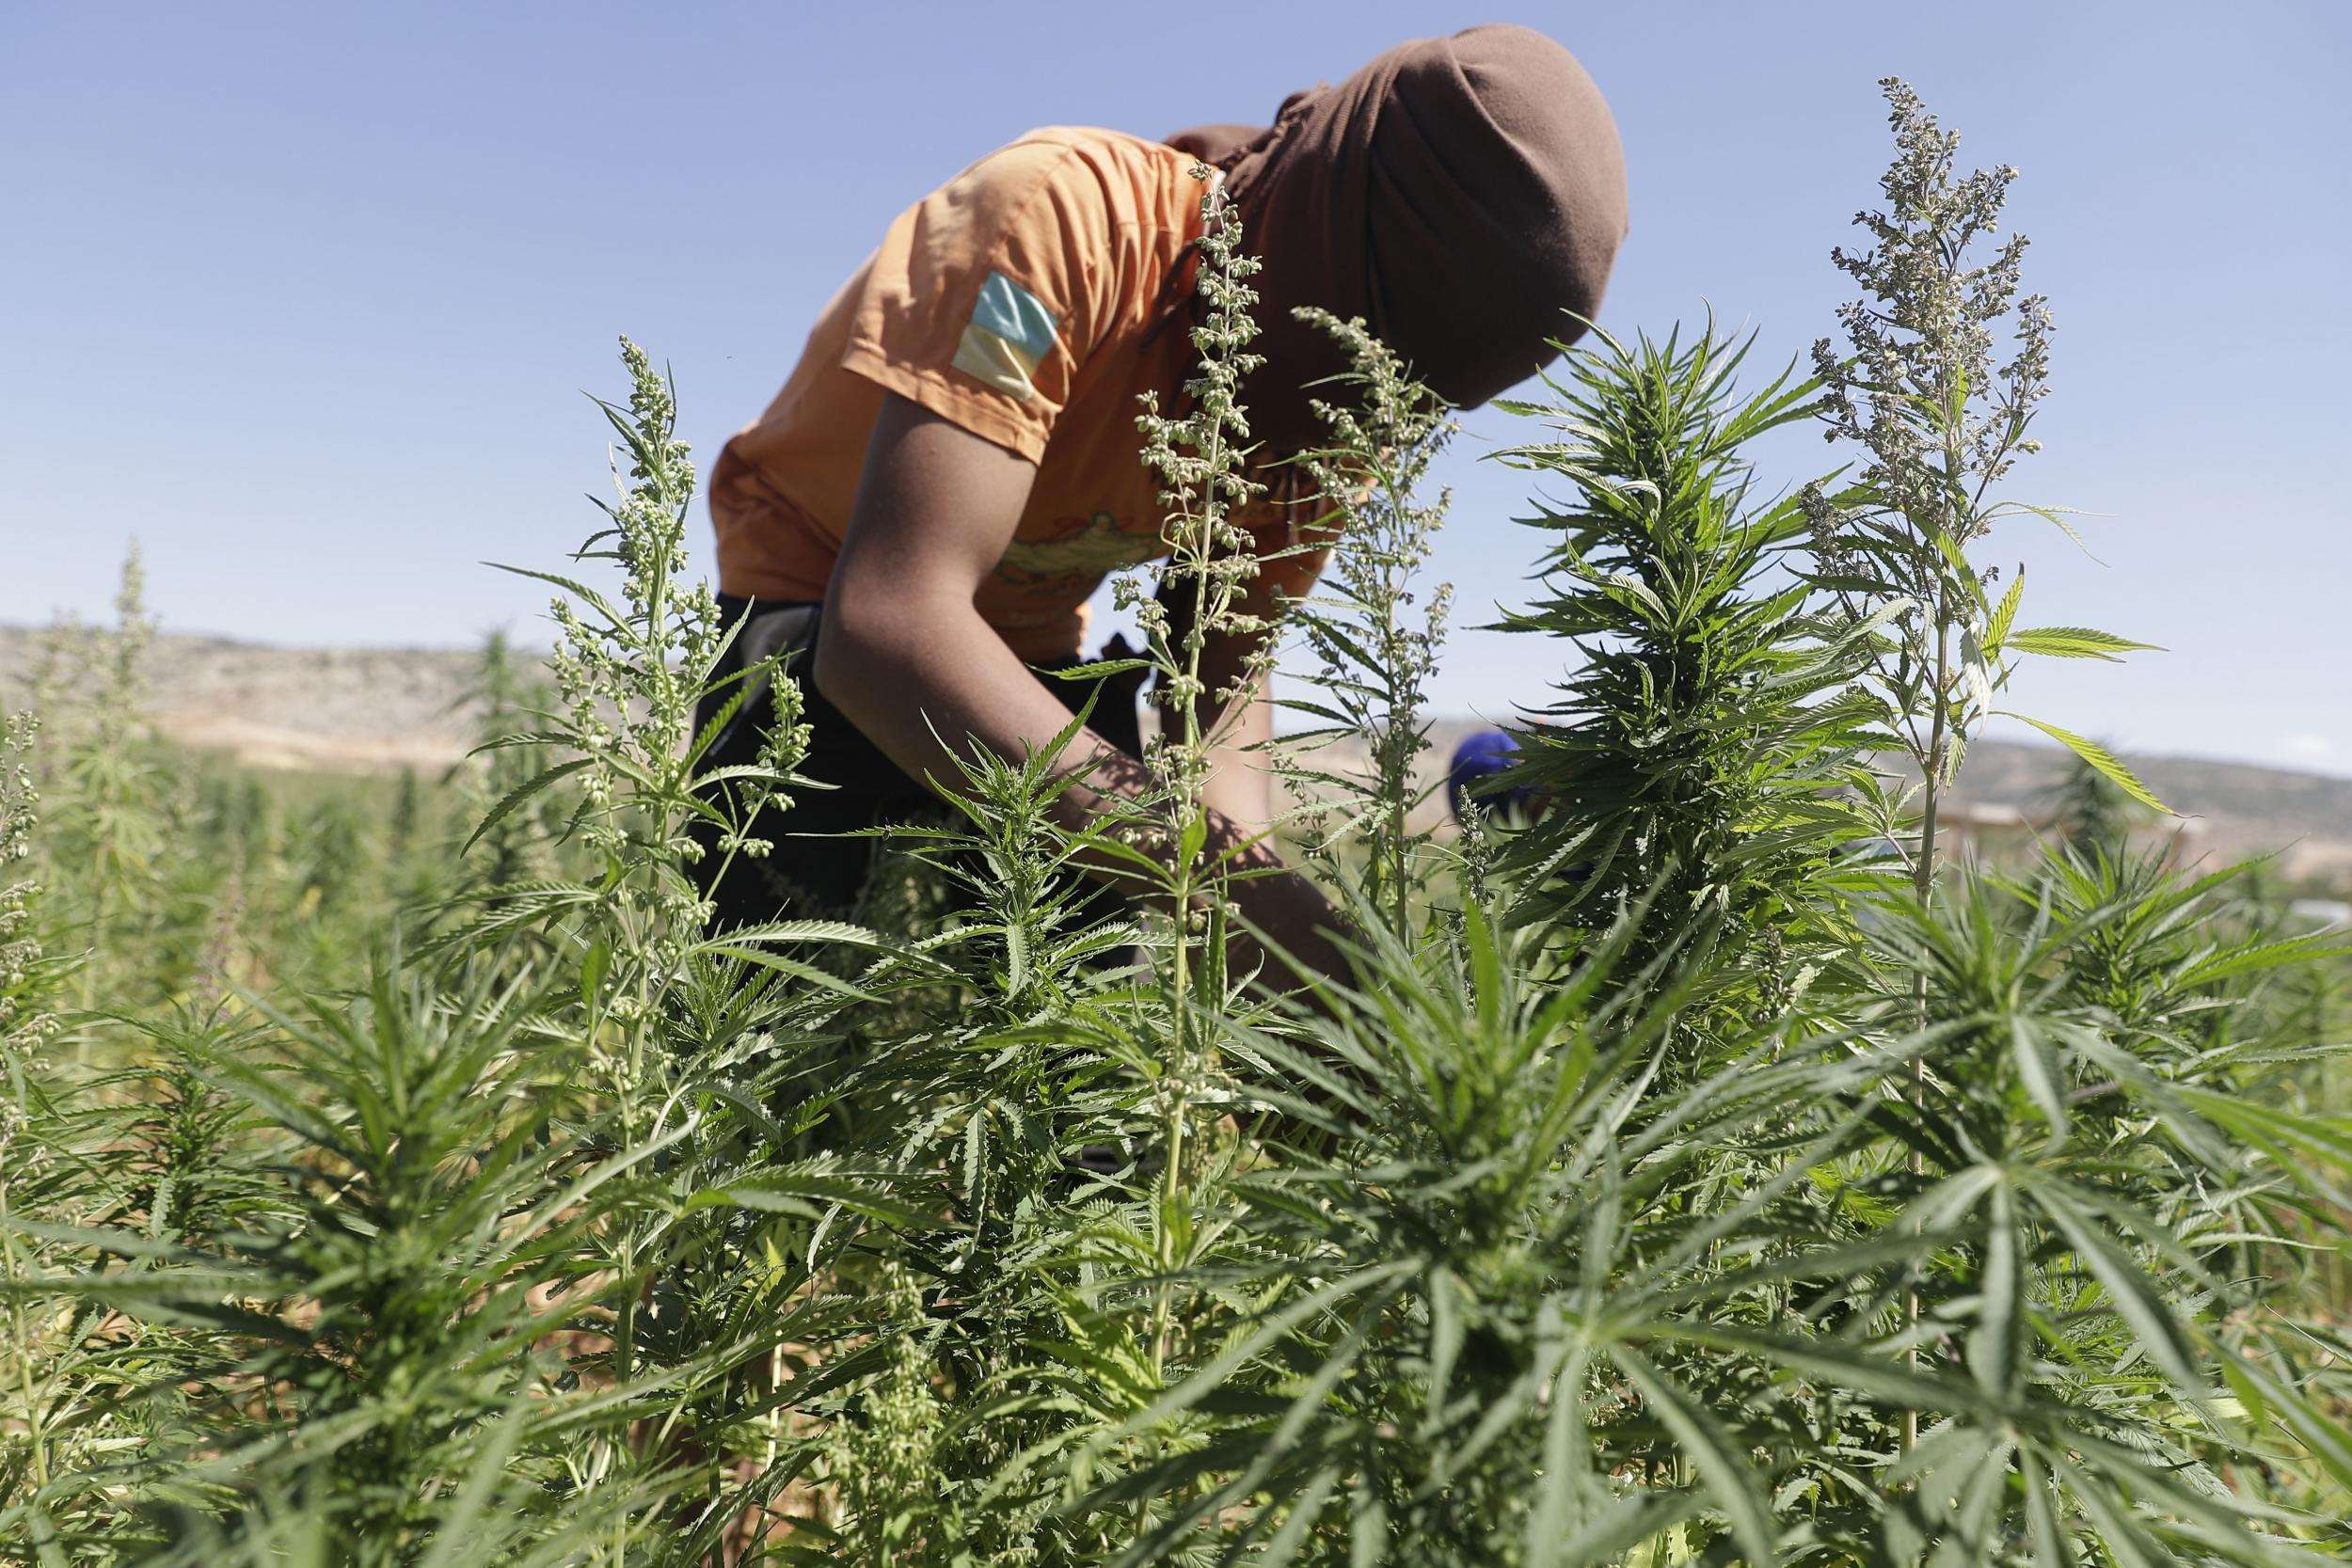 image for Lebanon becomes first Arab country to legalise cannabis farming for medical use in bid to beat economic crisis